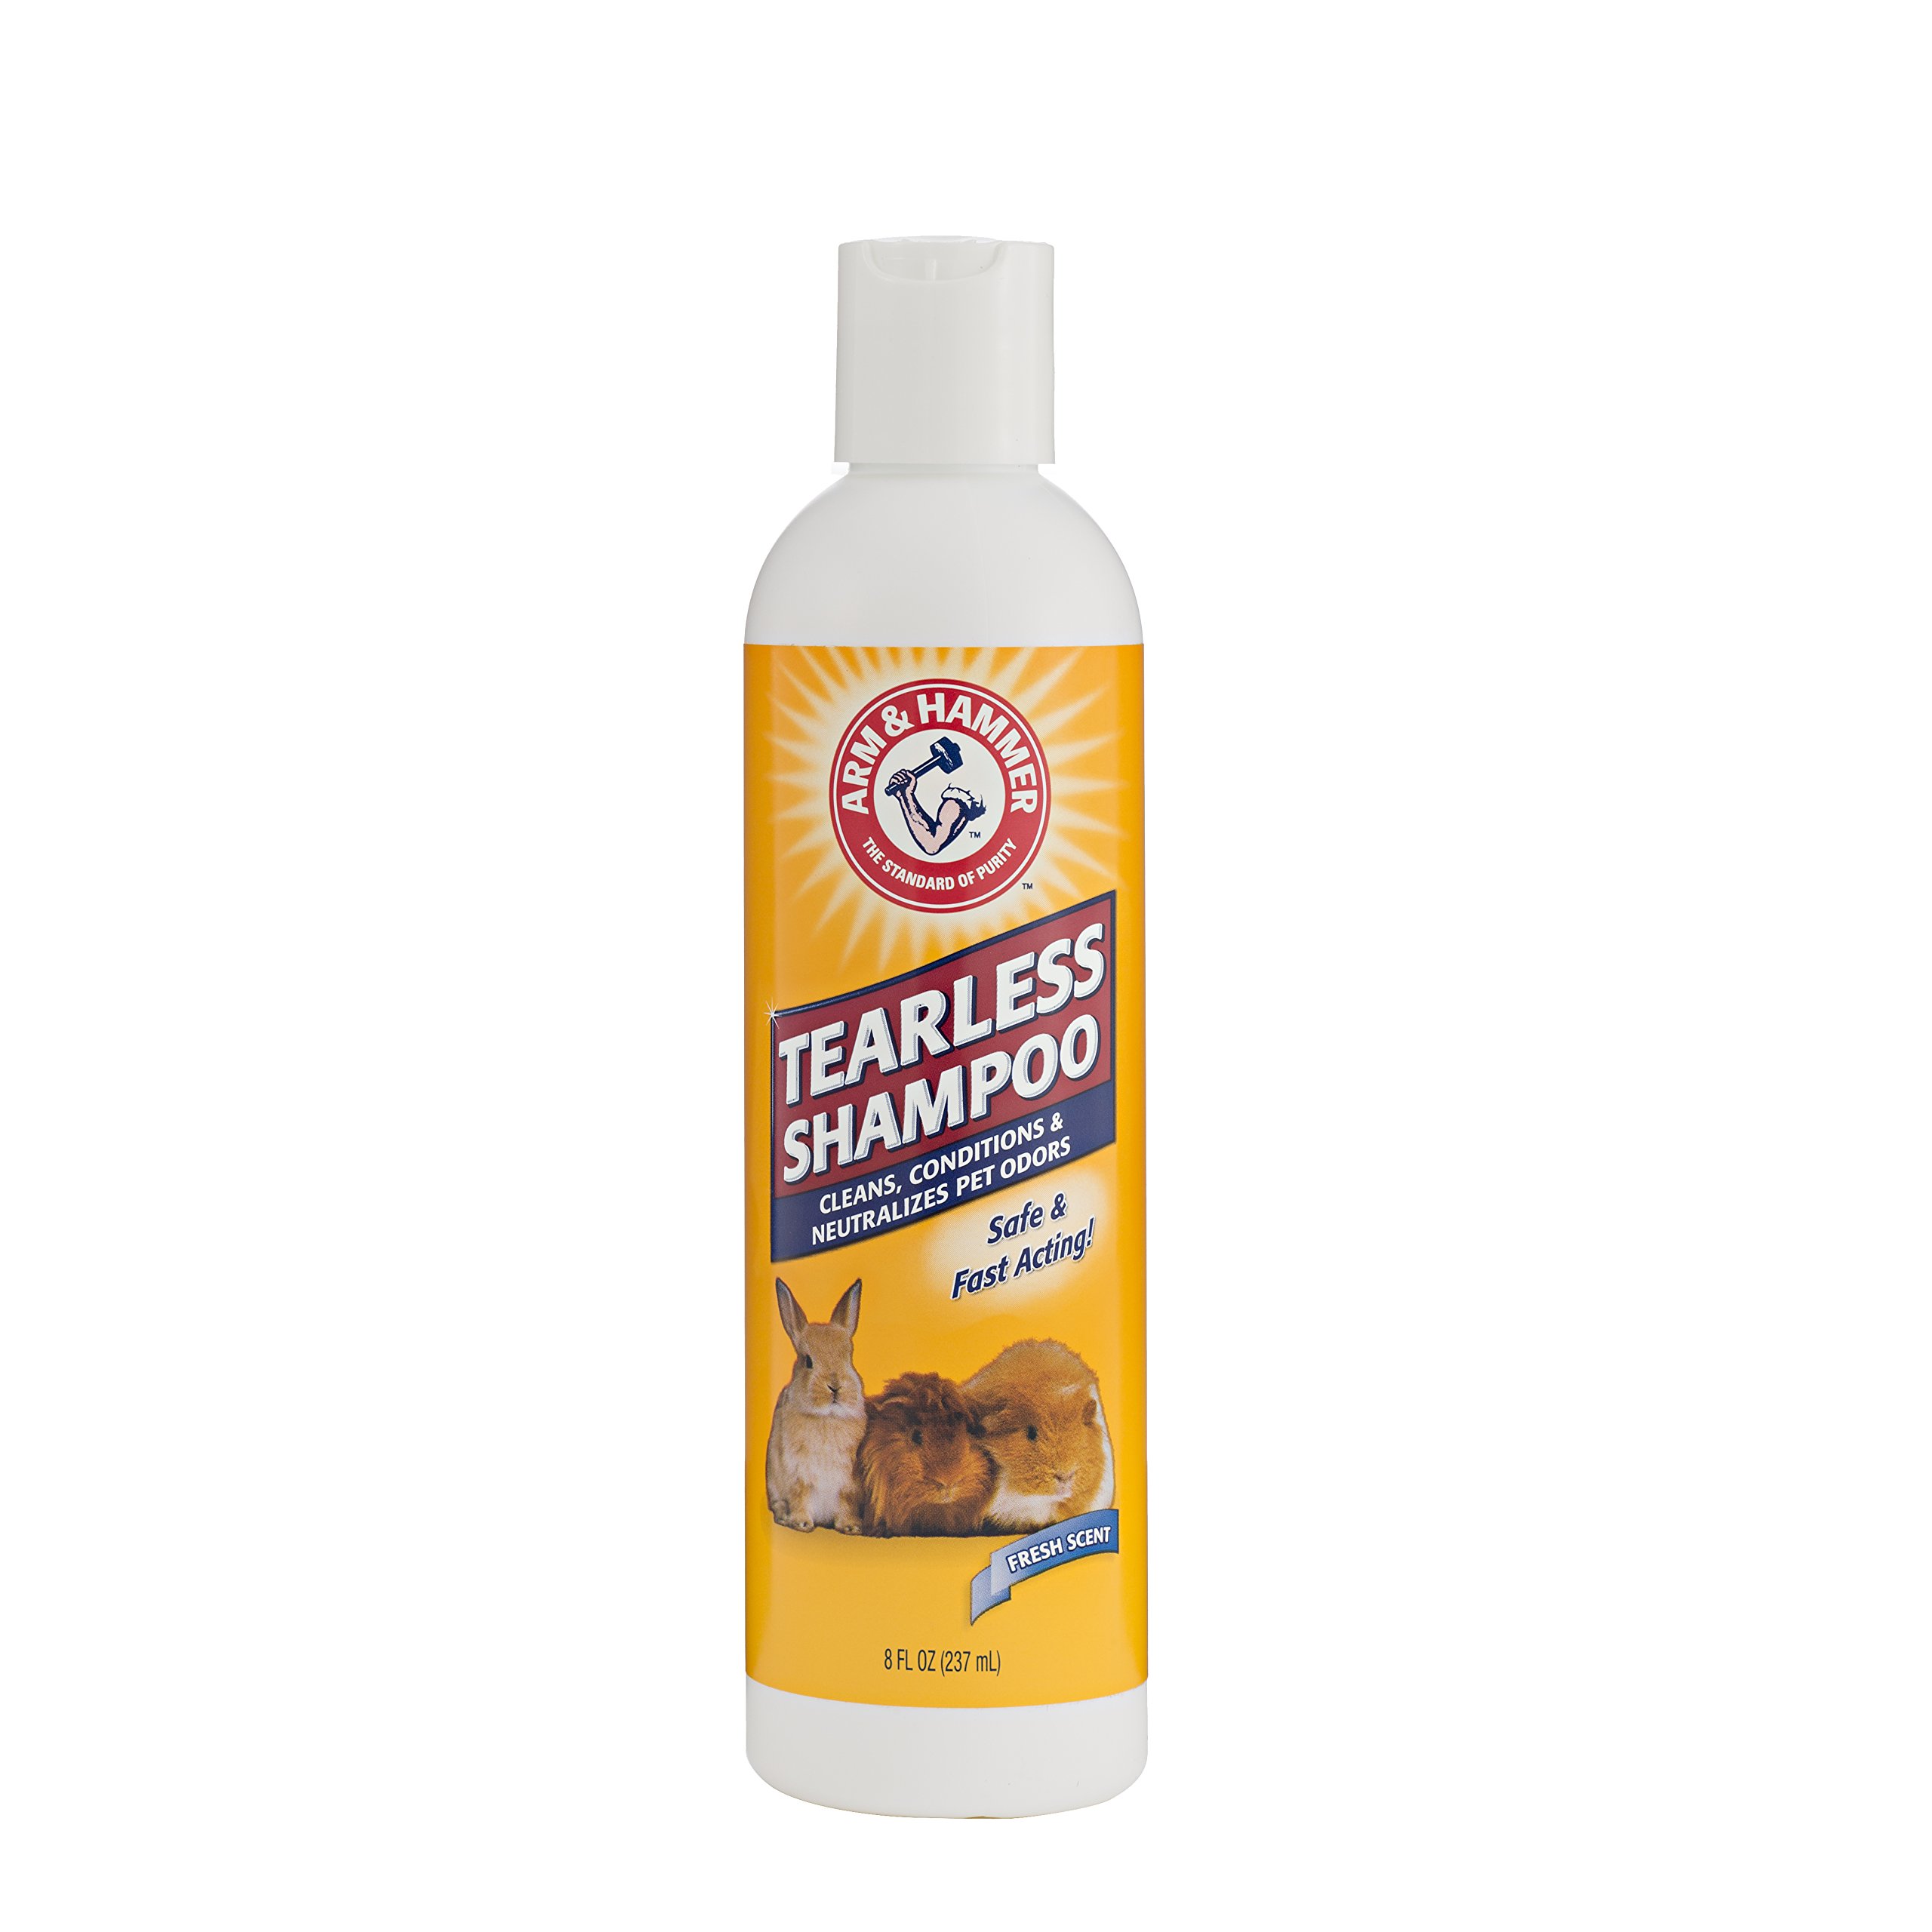 Book Cover Arm & Hammer Tearless Shampoo for Small Animals | Safe for Use Around Guinea Pigs, Hamsters, Rabbits & All Small Animals, 8 ounces, Fresh Scent